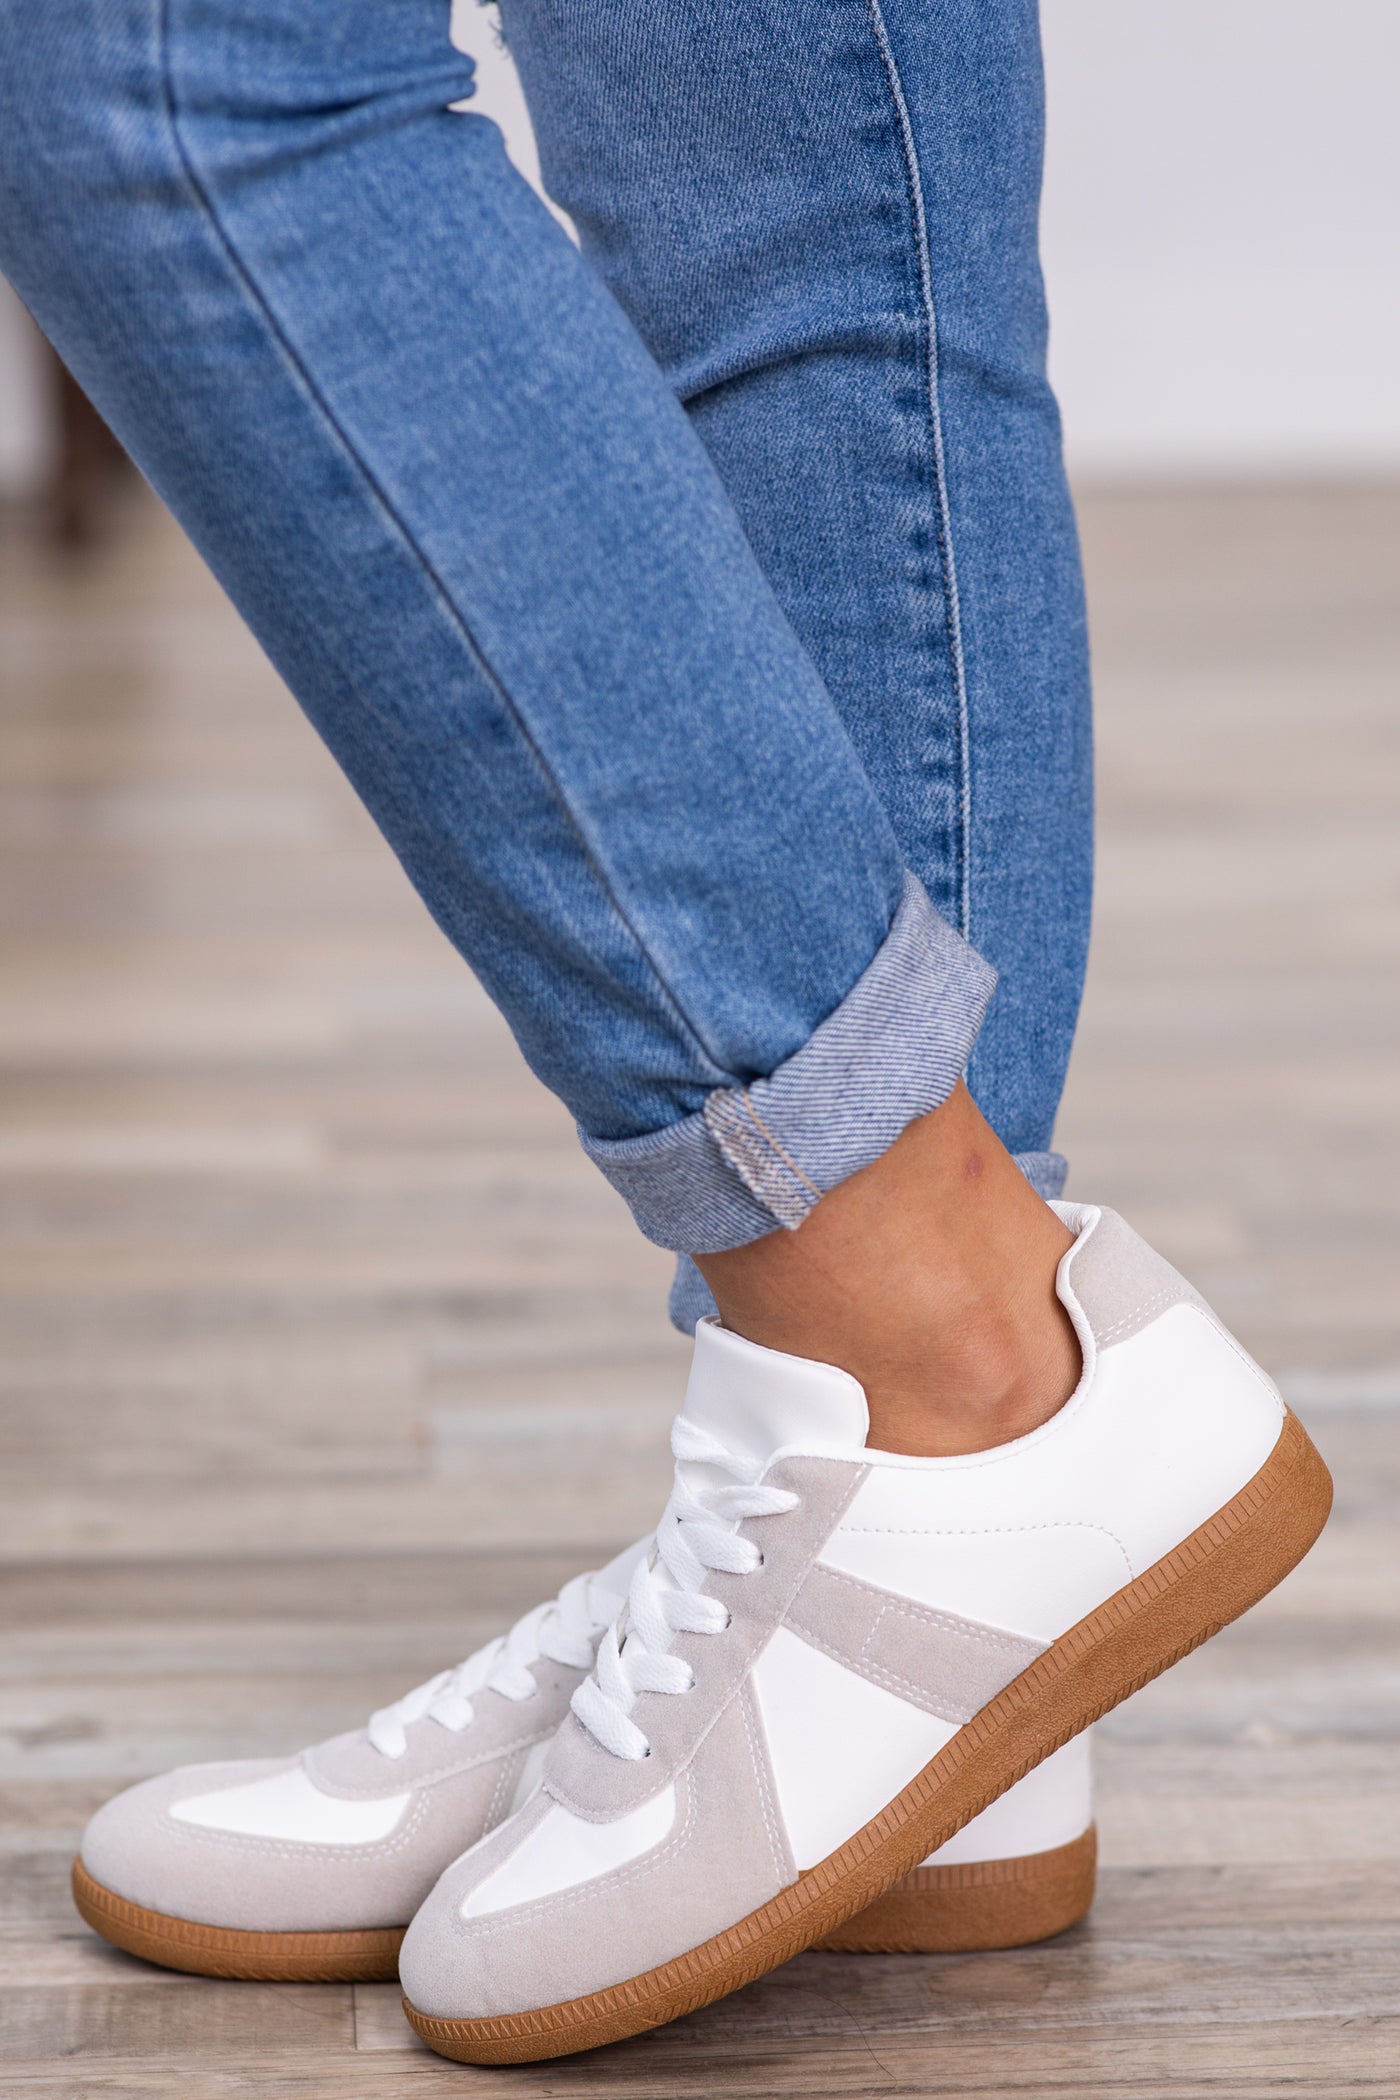 Oatmeal and White Colorblock Sneakers